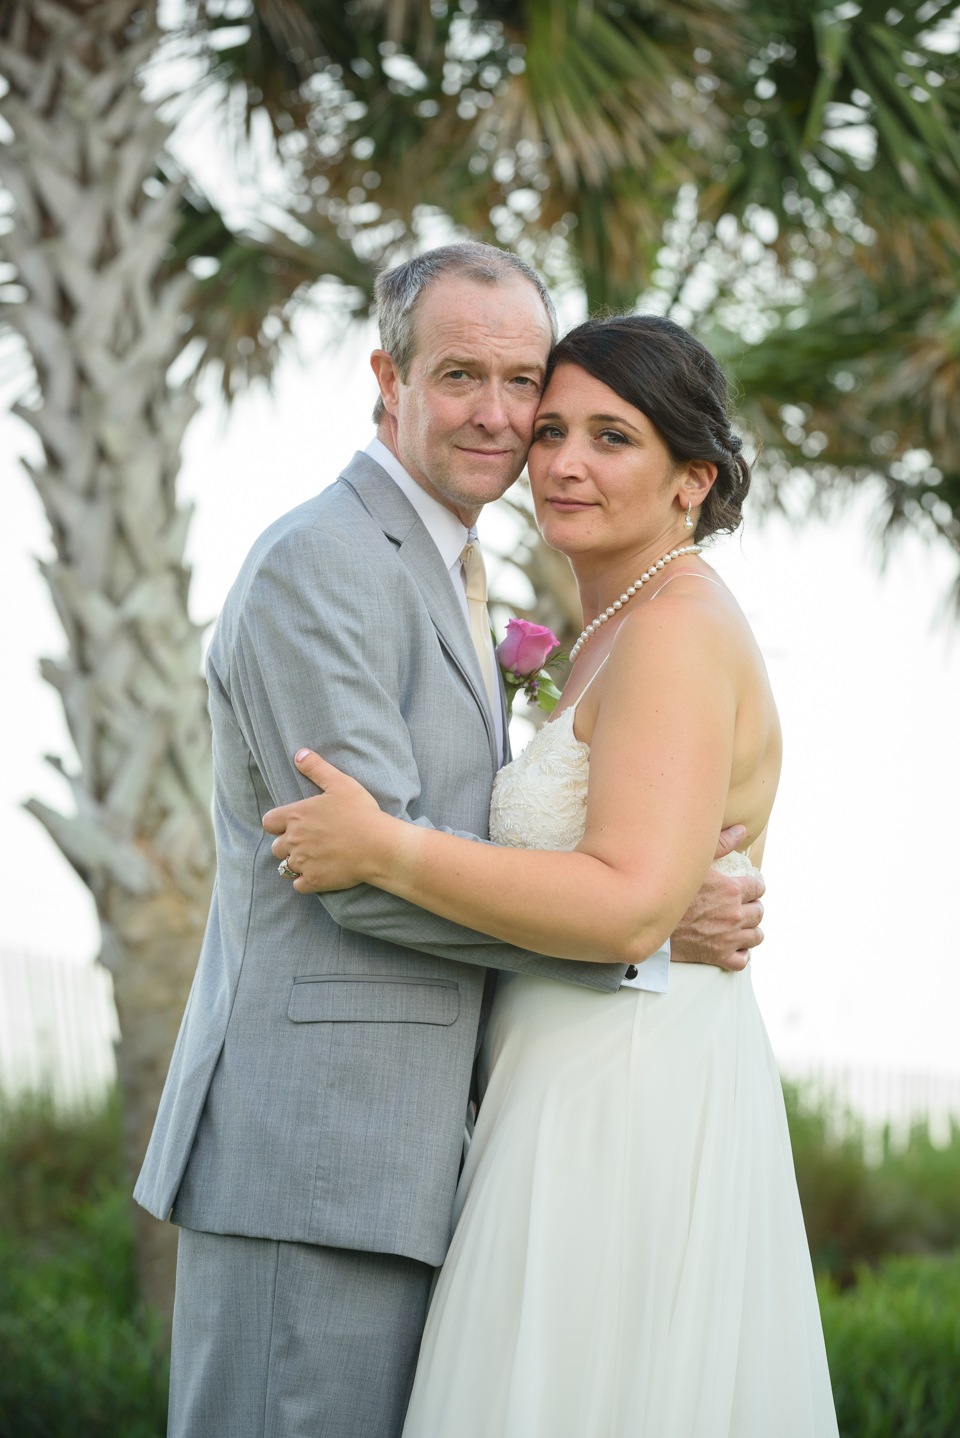 the wedding couple pose cheek to cheek for portraits at the beach